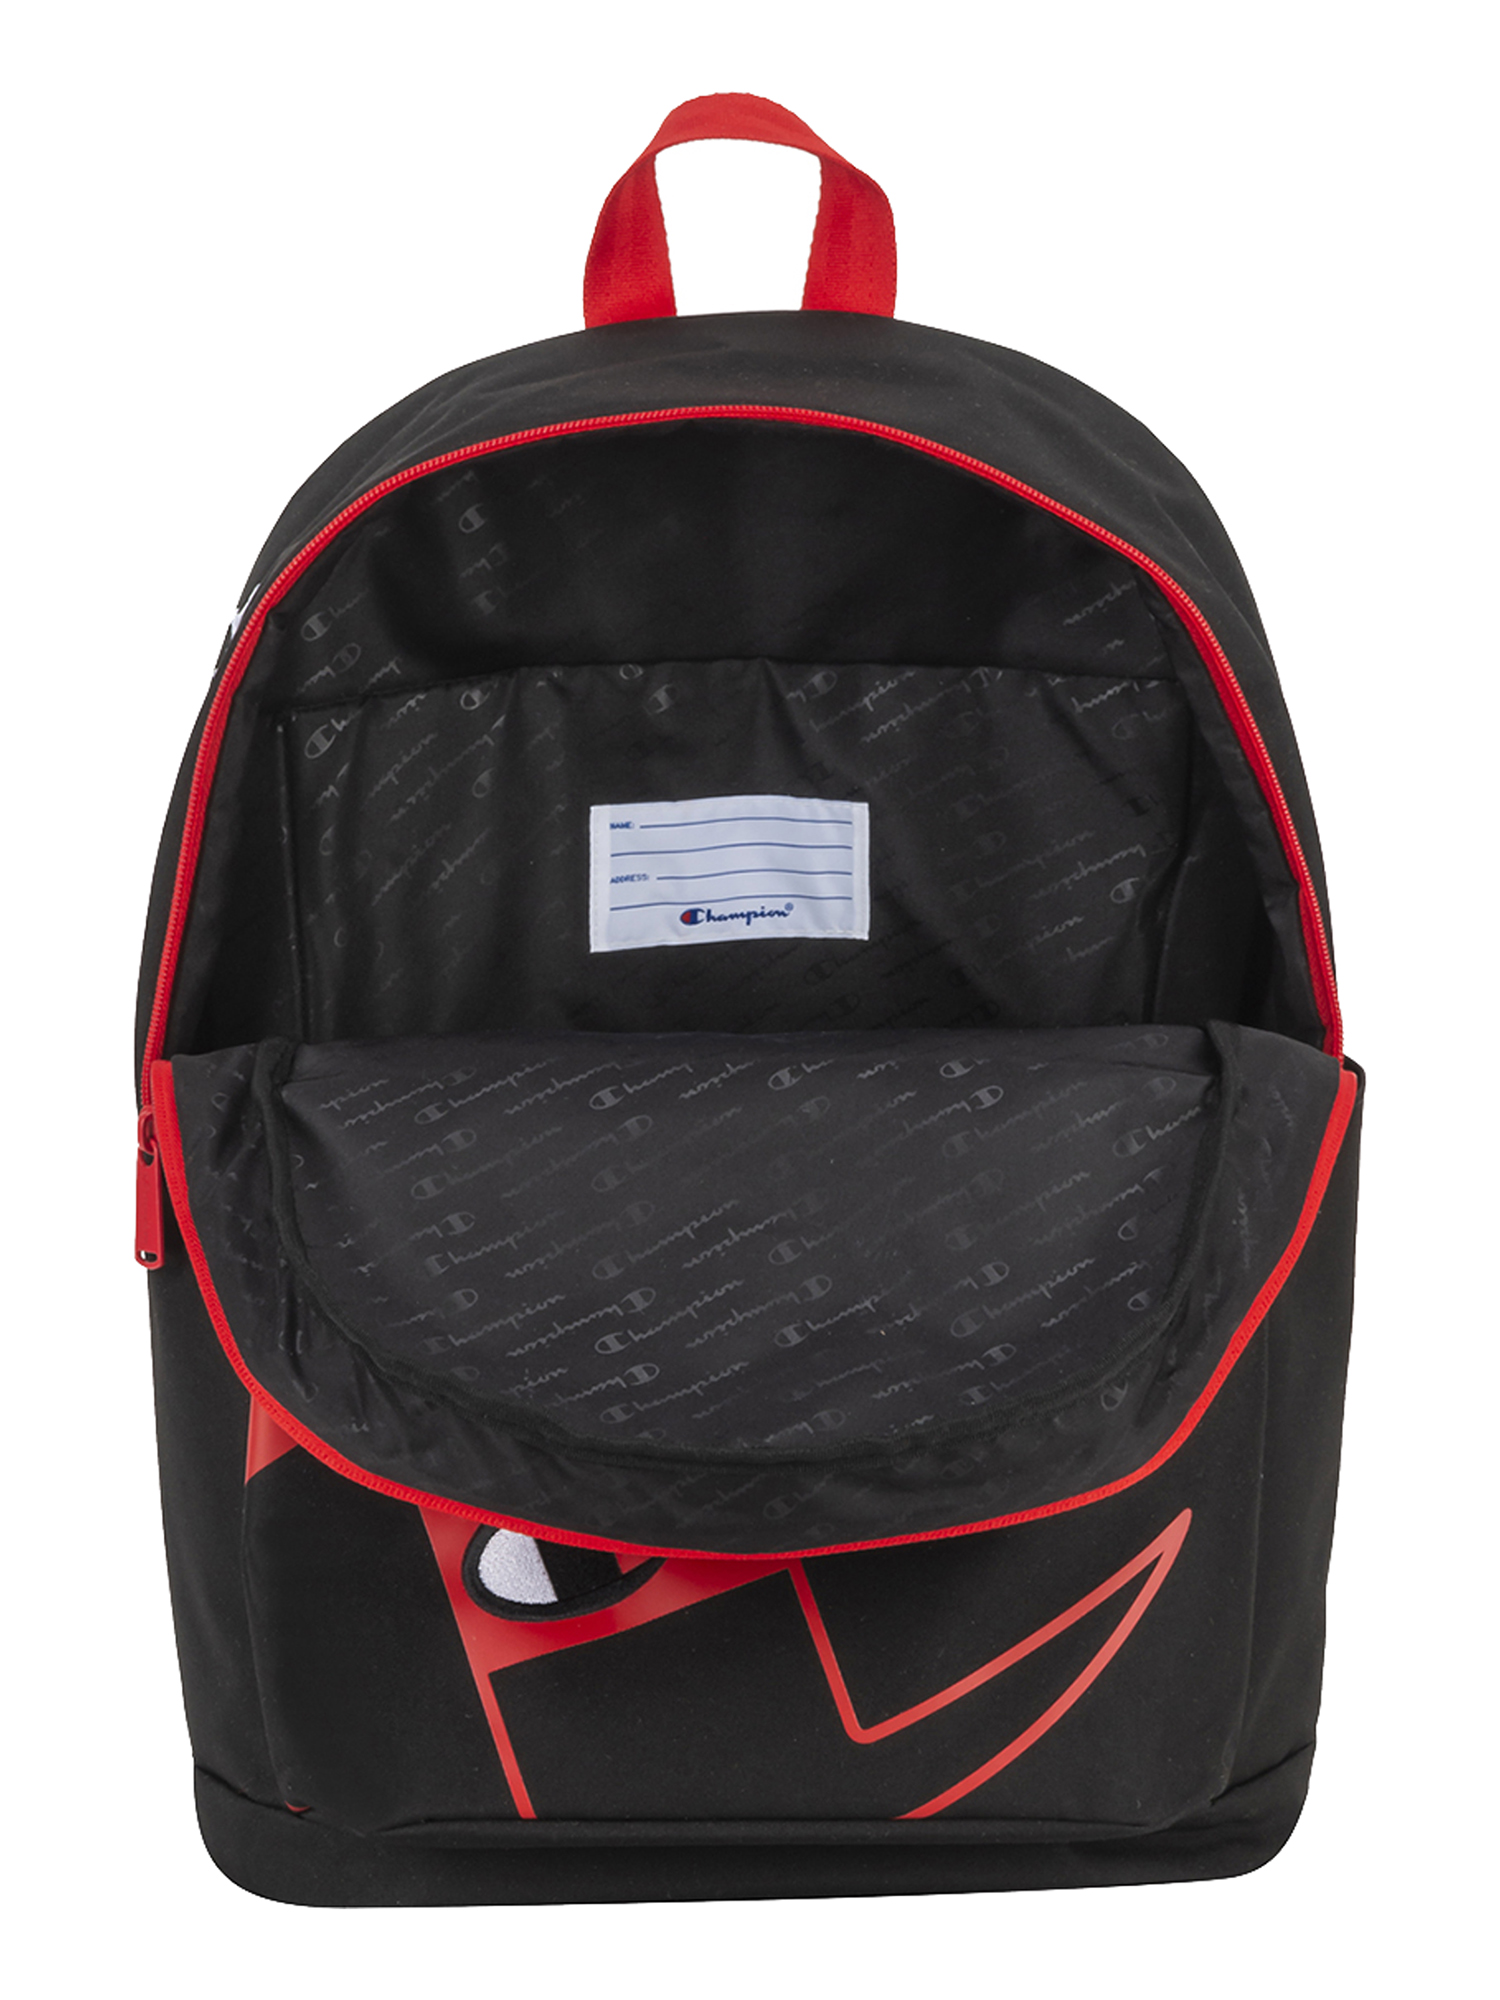 Champion Youth Supercize Backpack - image 4 of 4